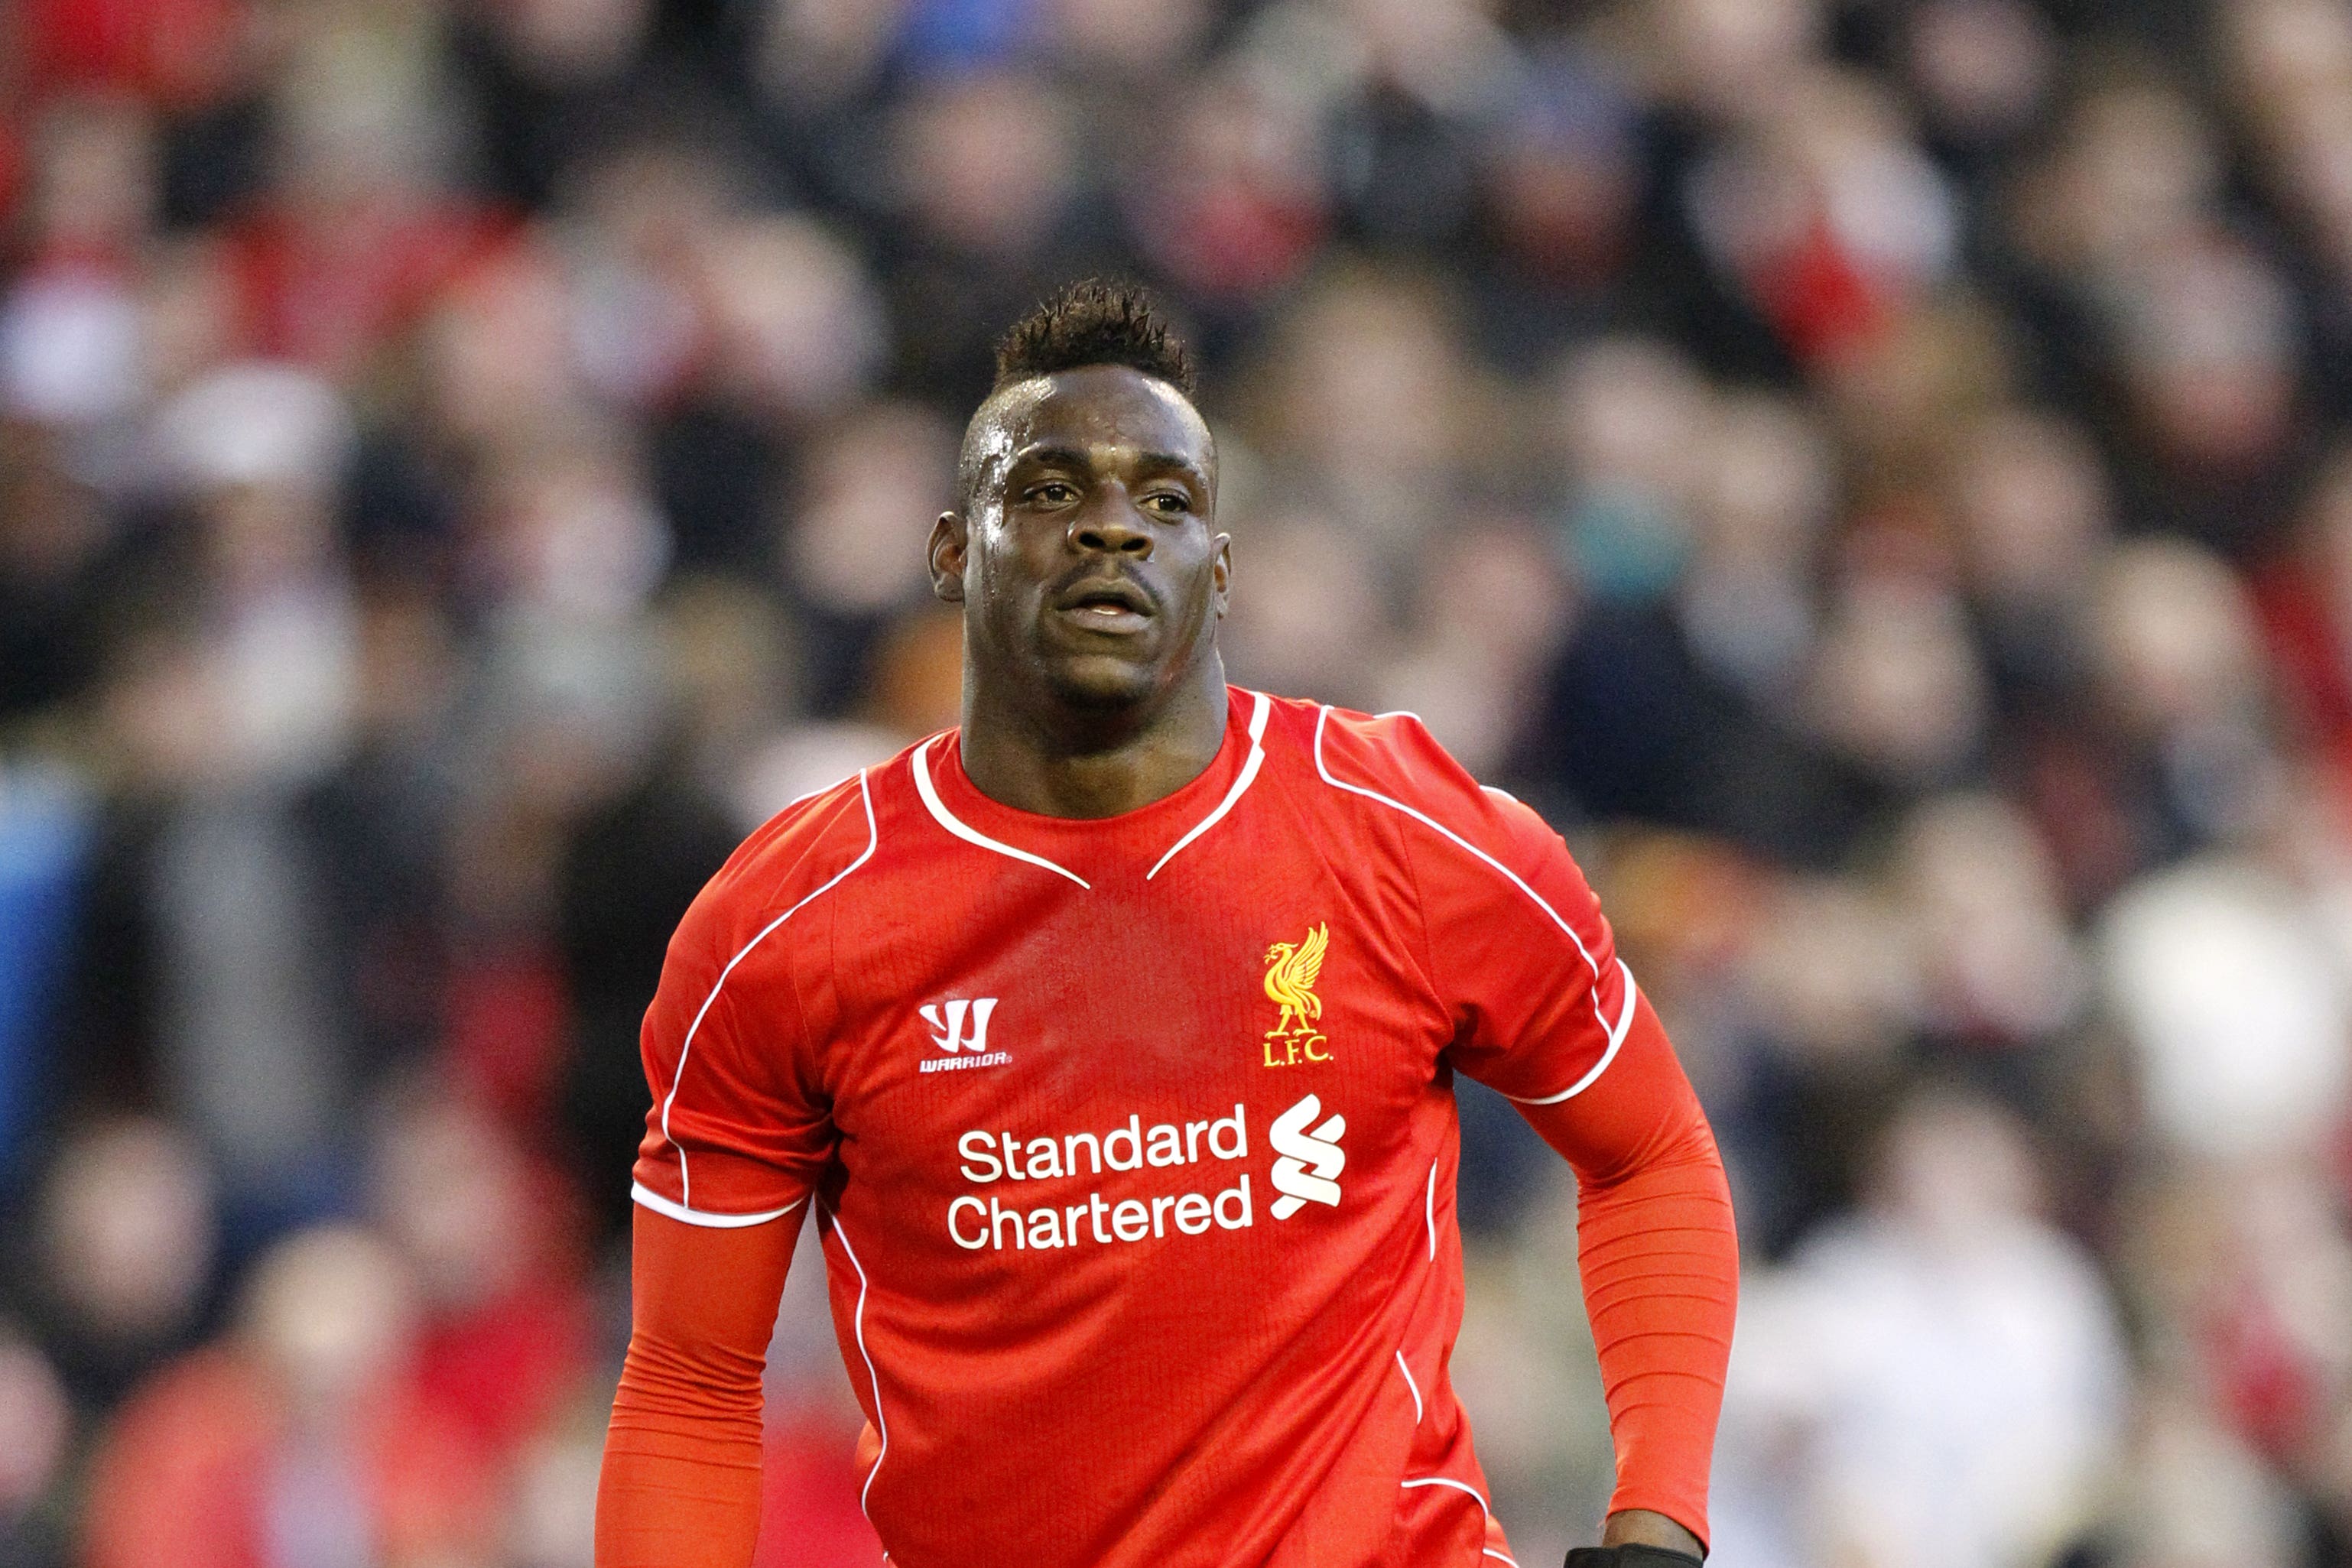 Liverpool’s Mario Balotelli was banned for one game and fined £25,000 over racist and anti-Semitic social media posts (Peter Byrne/PA)